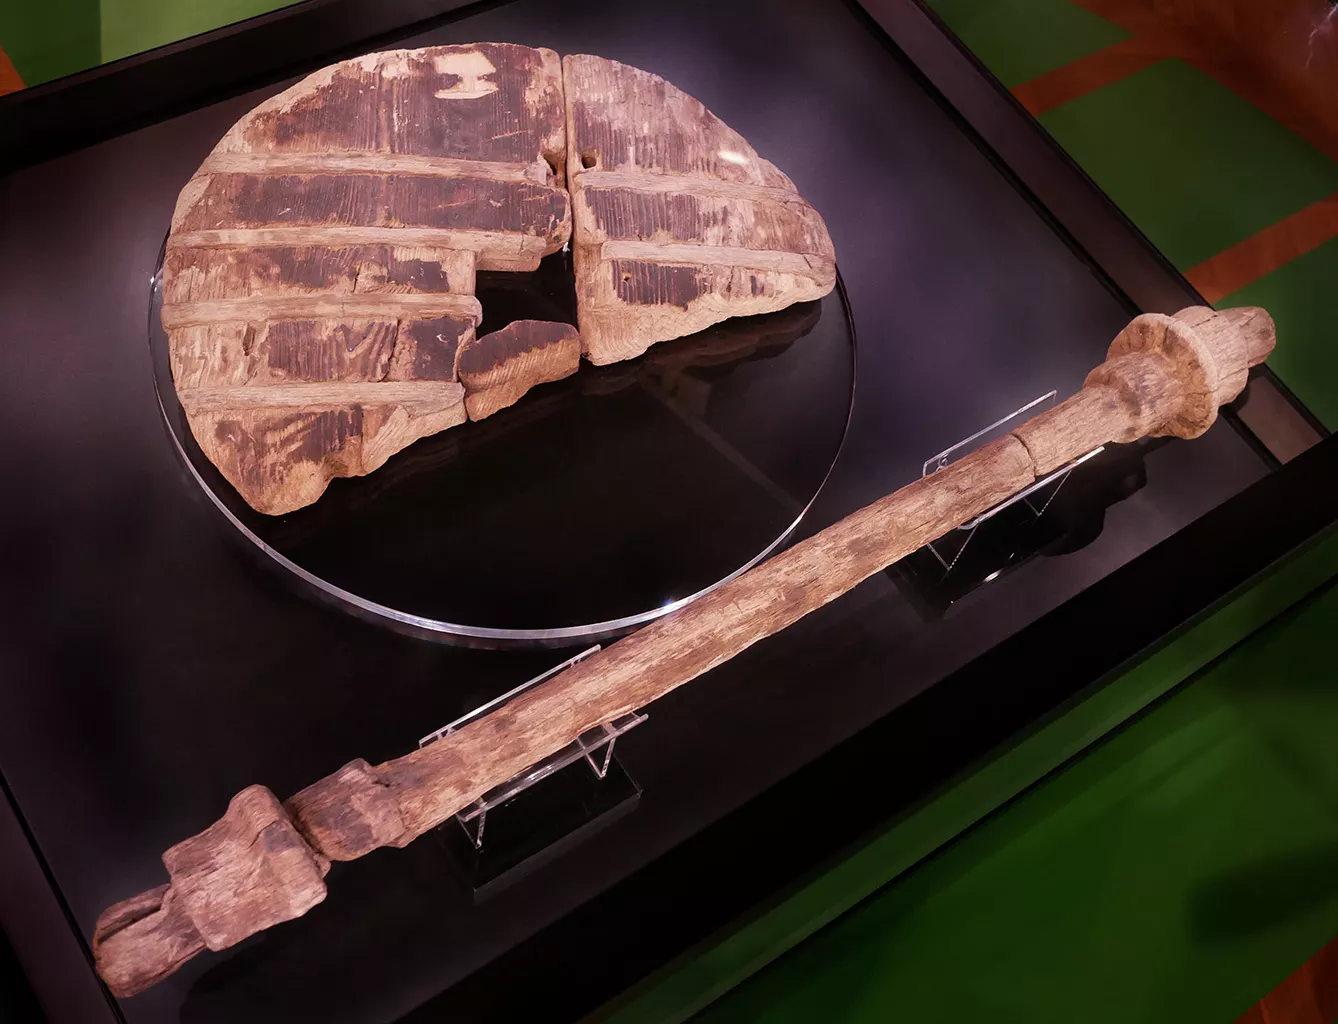 oldest wooden wheel yet discovered